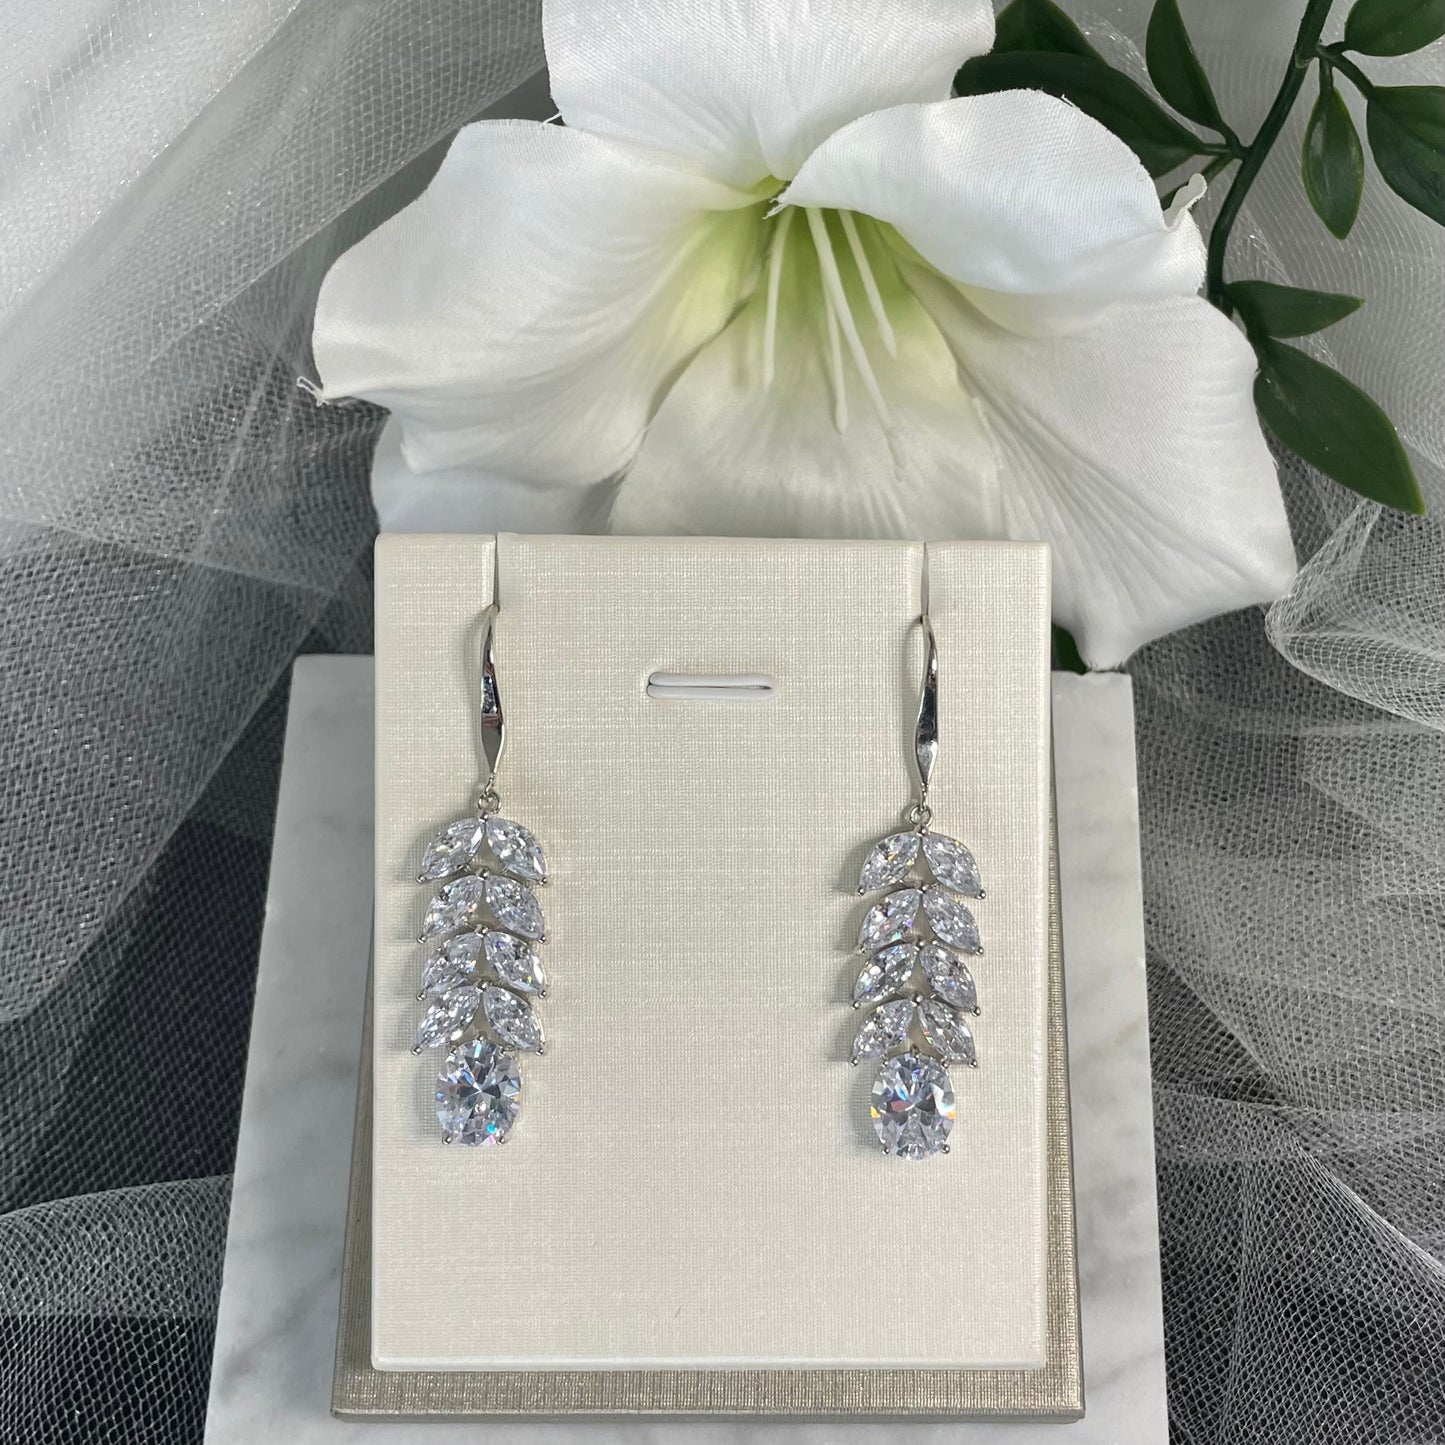 Ember 925 Silver Bridal Earrings with Sparkling Leaf Drop Zircon Stones - Divine Bridal